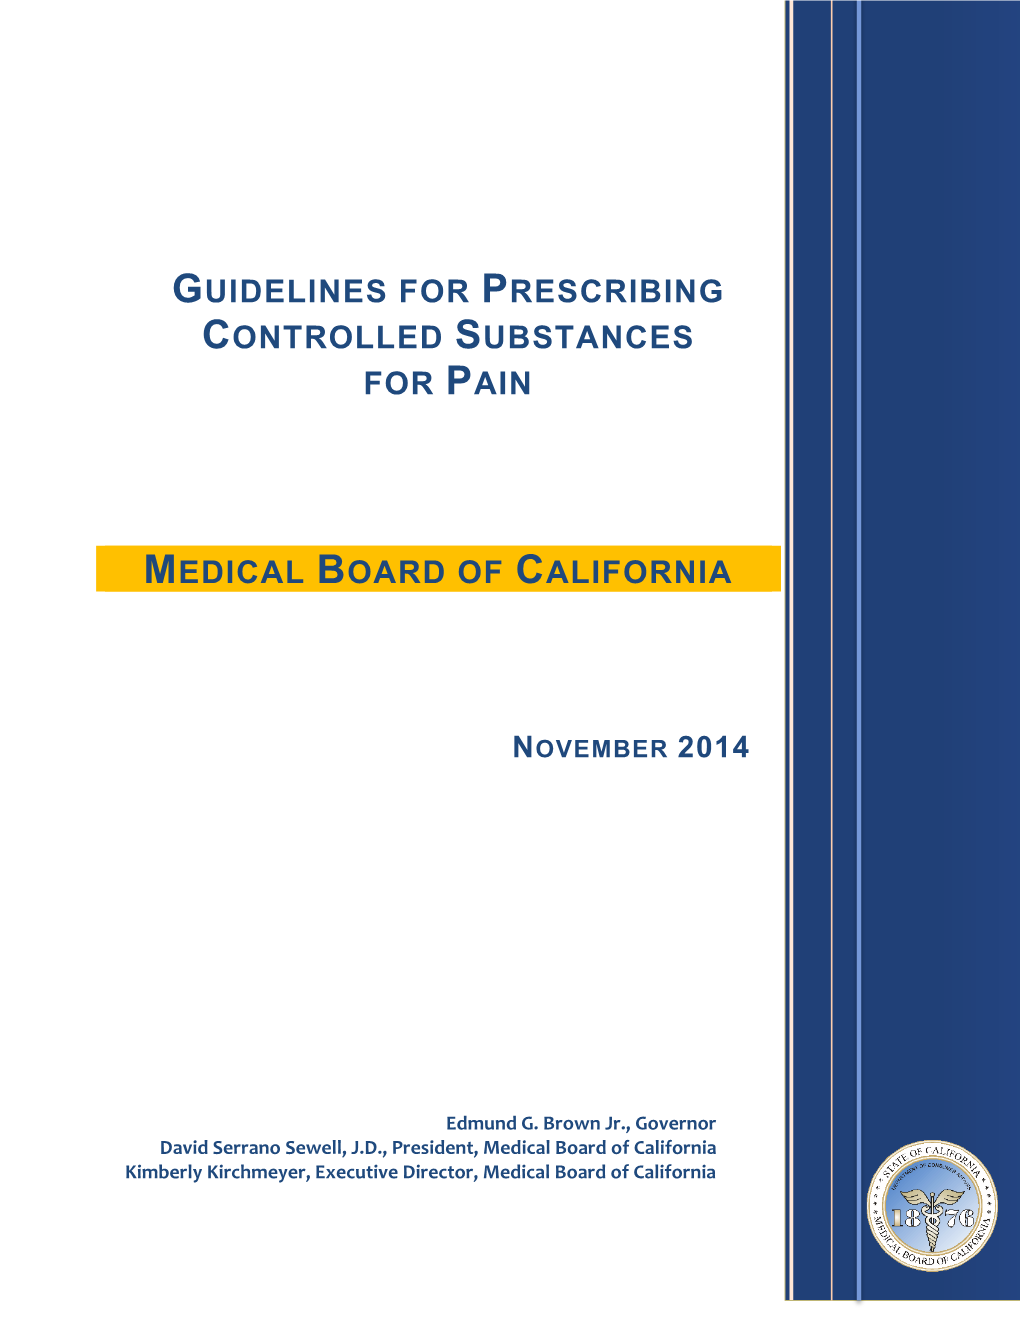 Guidelines for Prescribing Controlled Substances for Pain